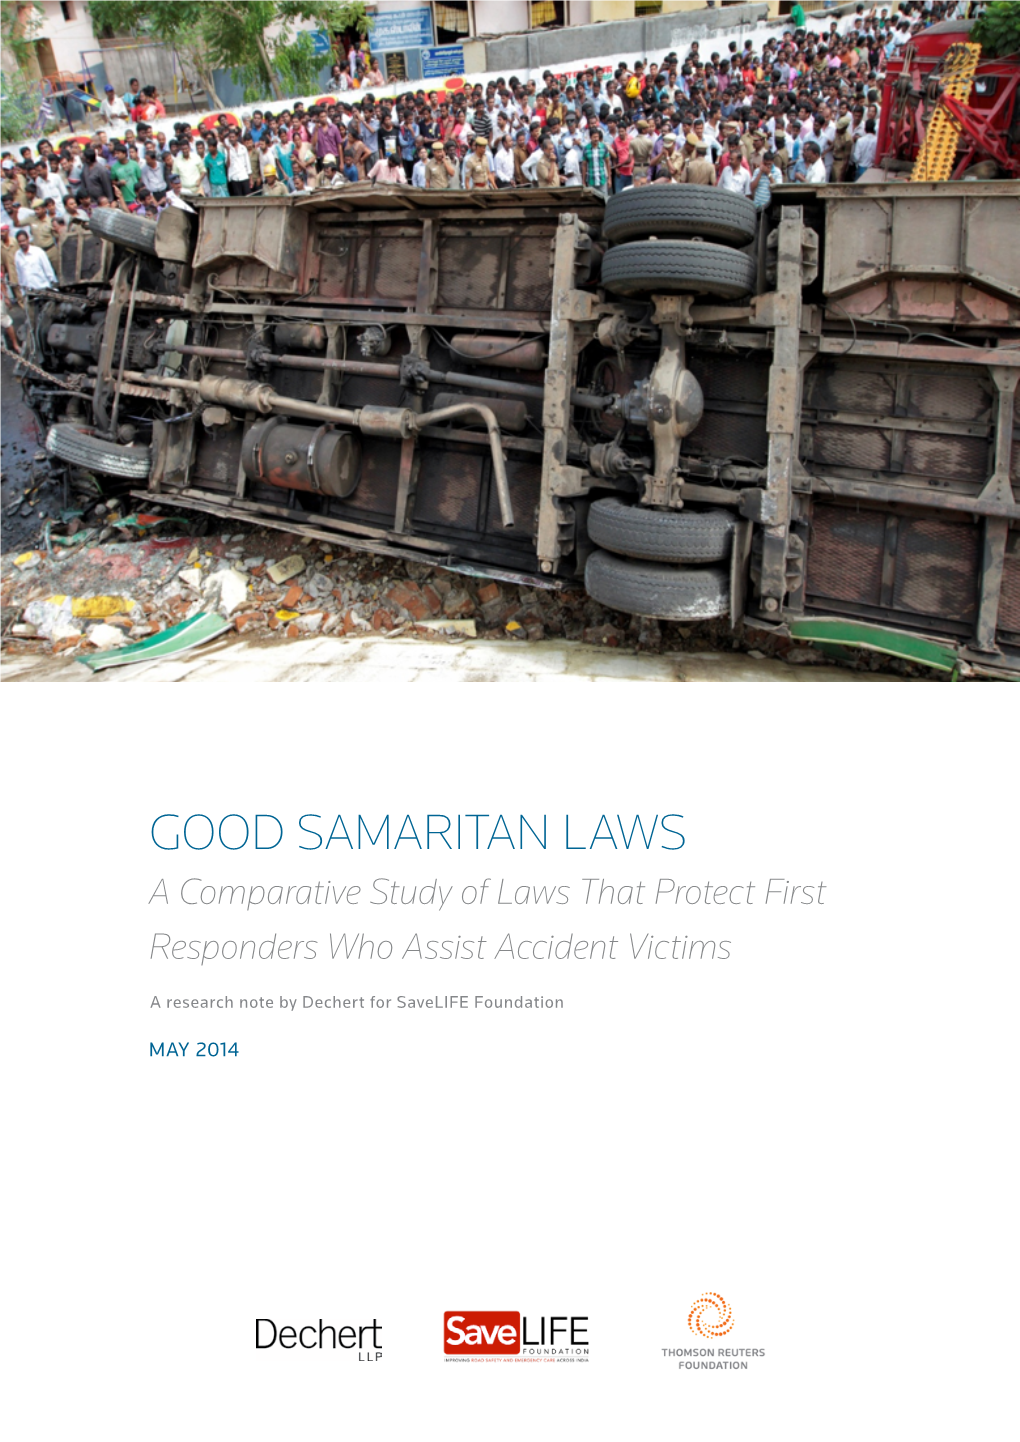 Good Samaritan Laws a Comparative Study of Laws That Protect First Responders Who Assist Accident Victims